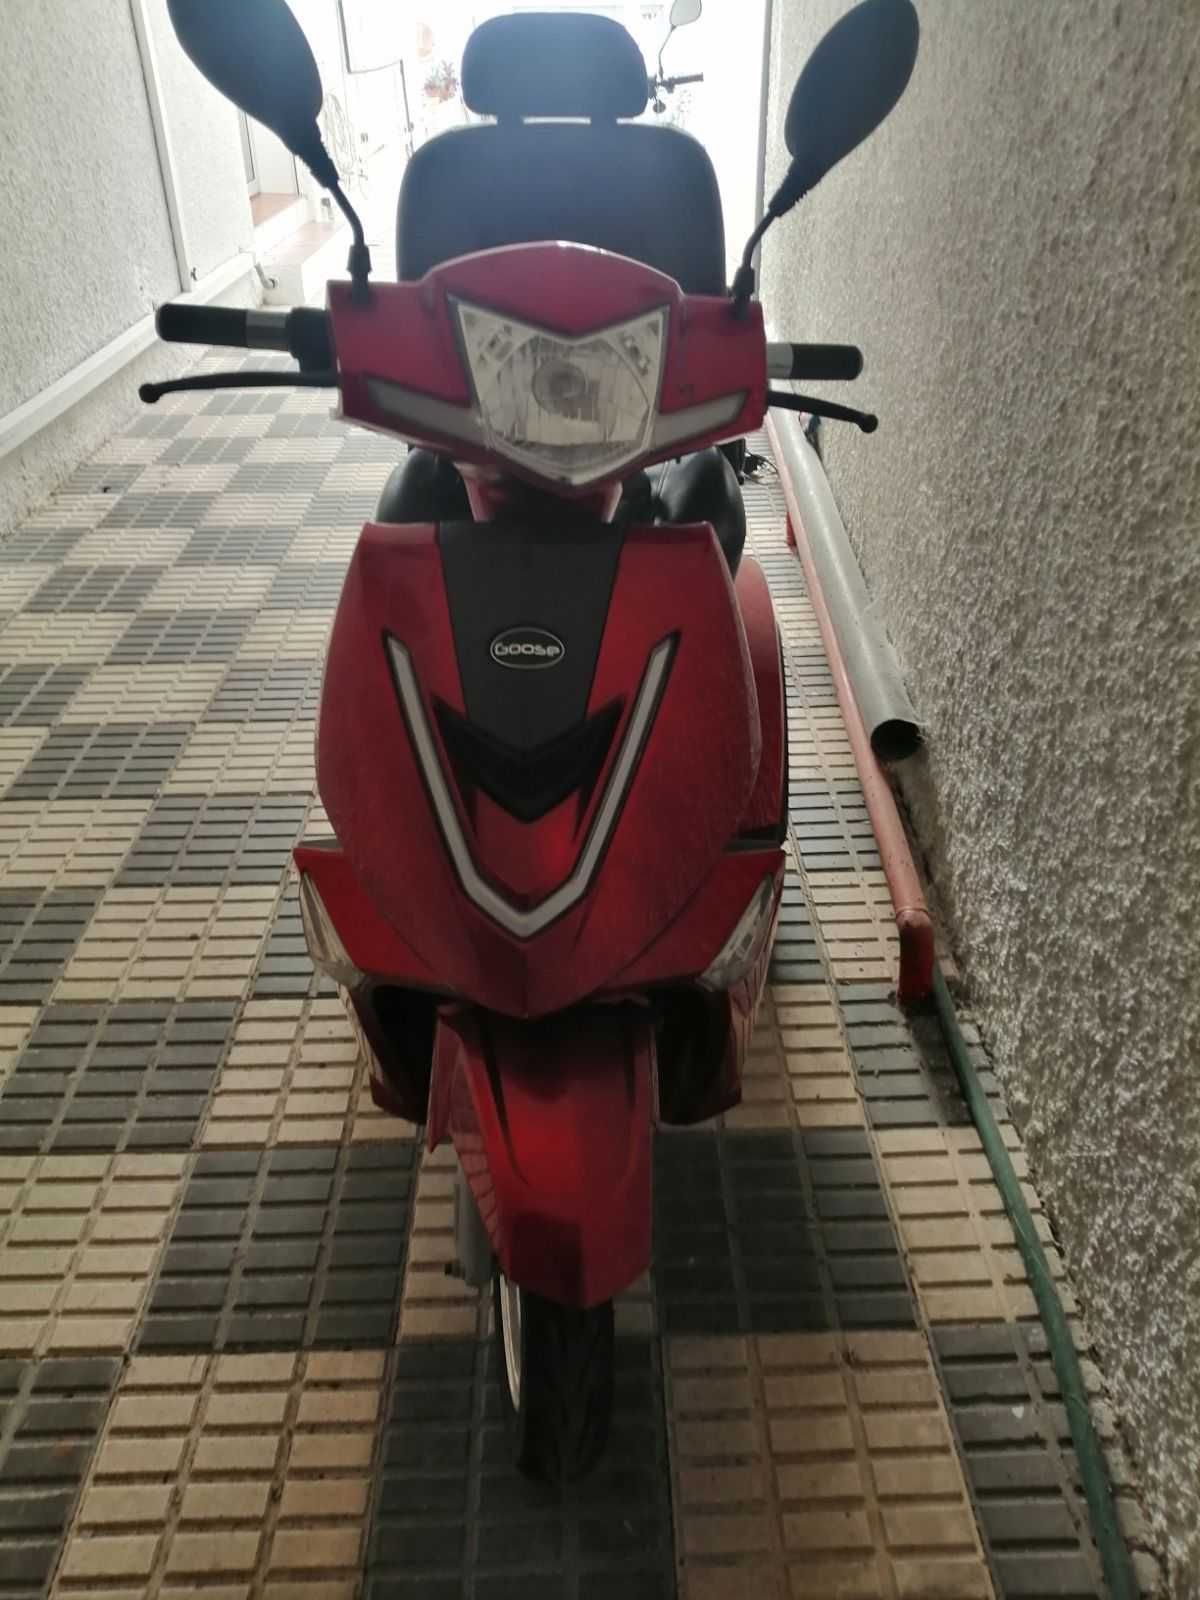 Goose R3N Scooter Mobilidade